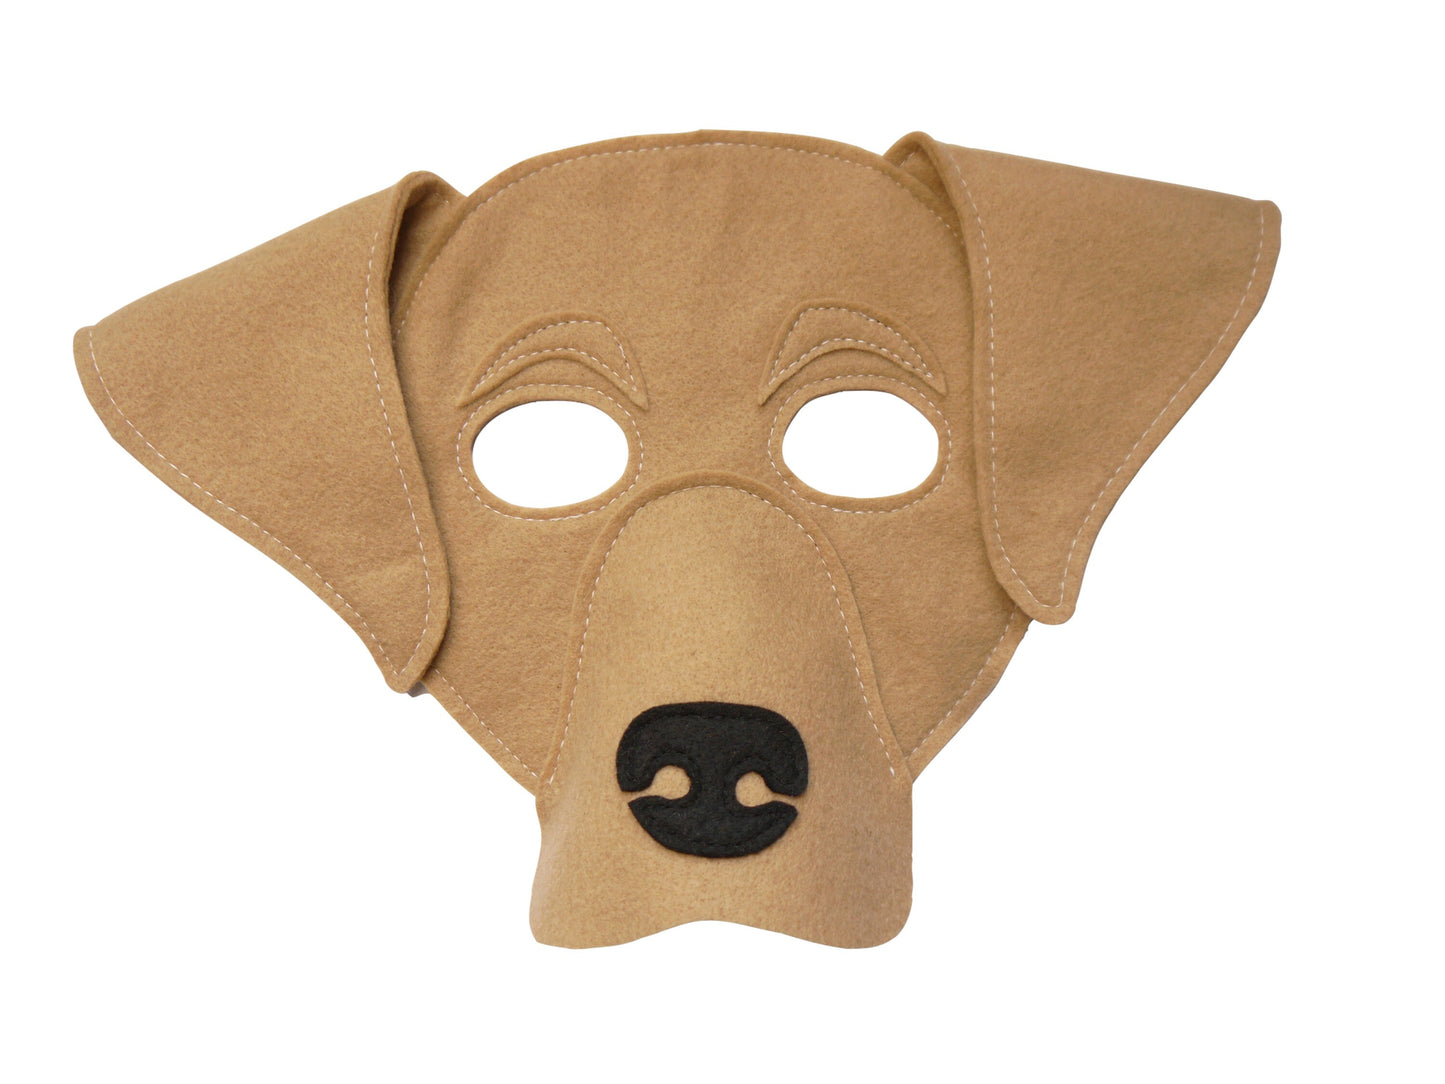 Golden Labrador Dog costume mask and paws